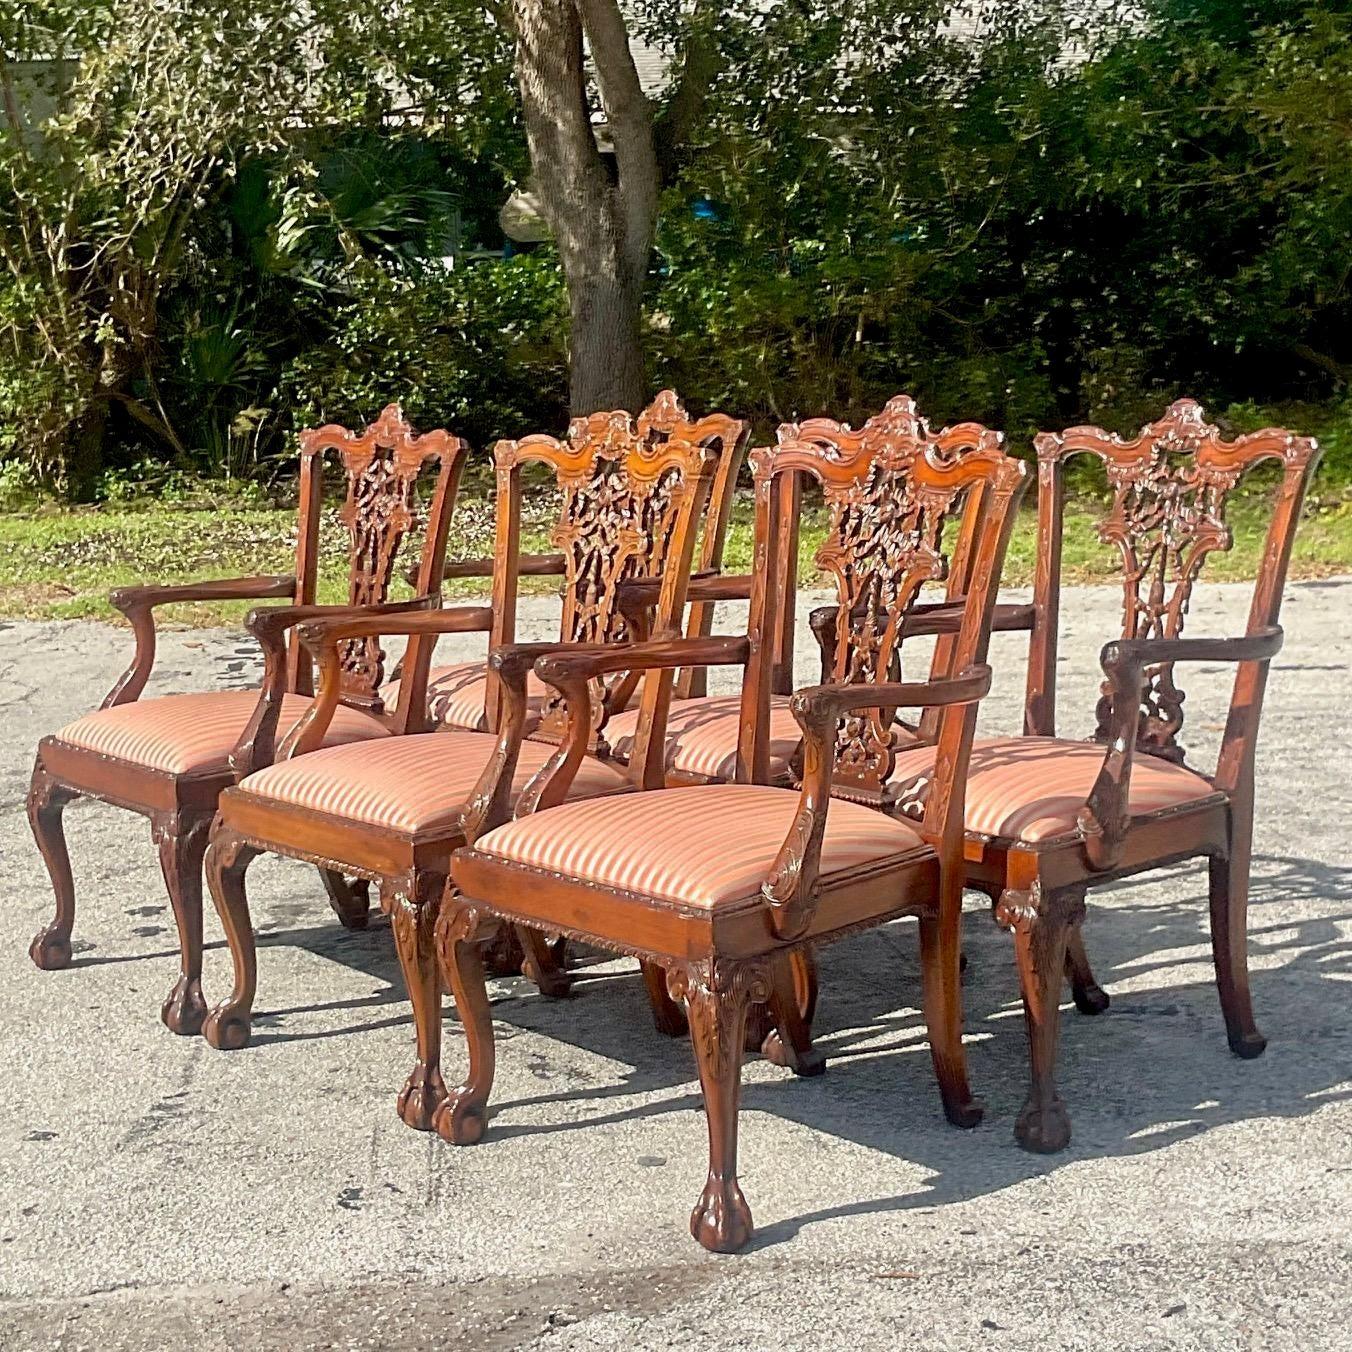 A fabulous set of six vintage Dining chairs. Hand carved detail on the classic Chippendale shape. Cabriolet legs with the iconic ball and claw foot. Acquired from a Palm Beach estate.